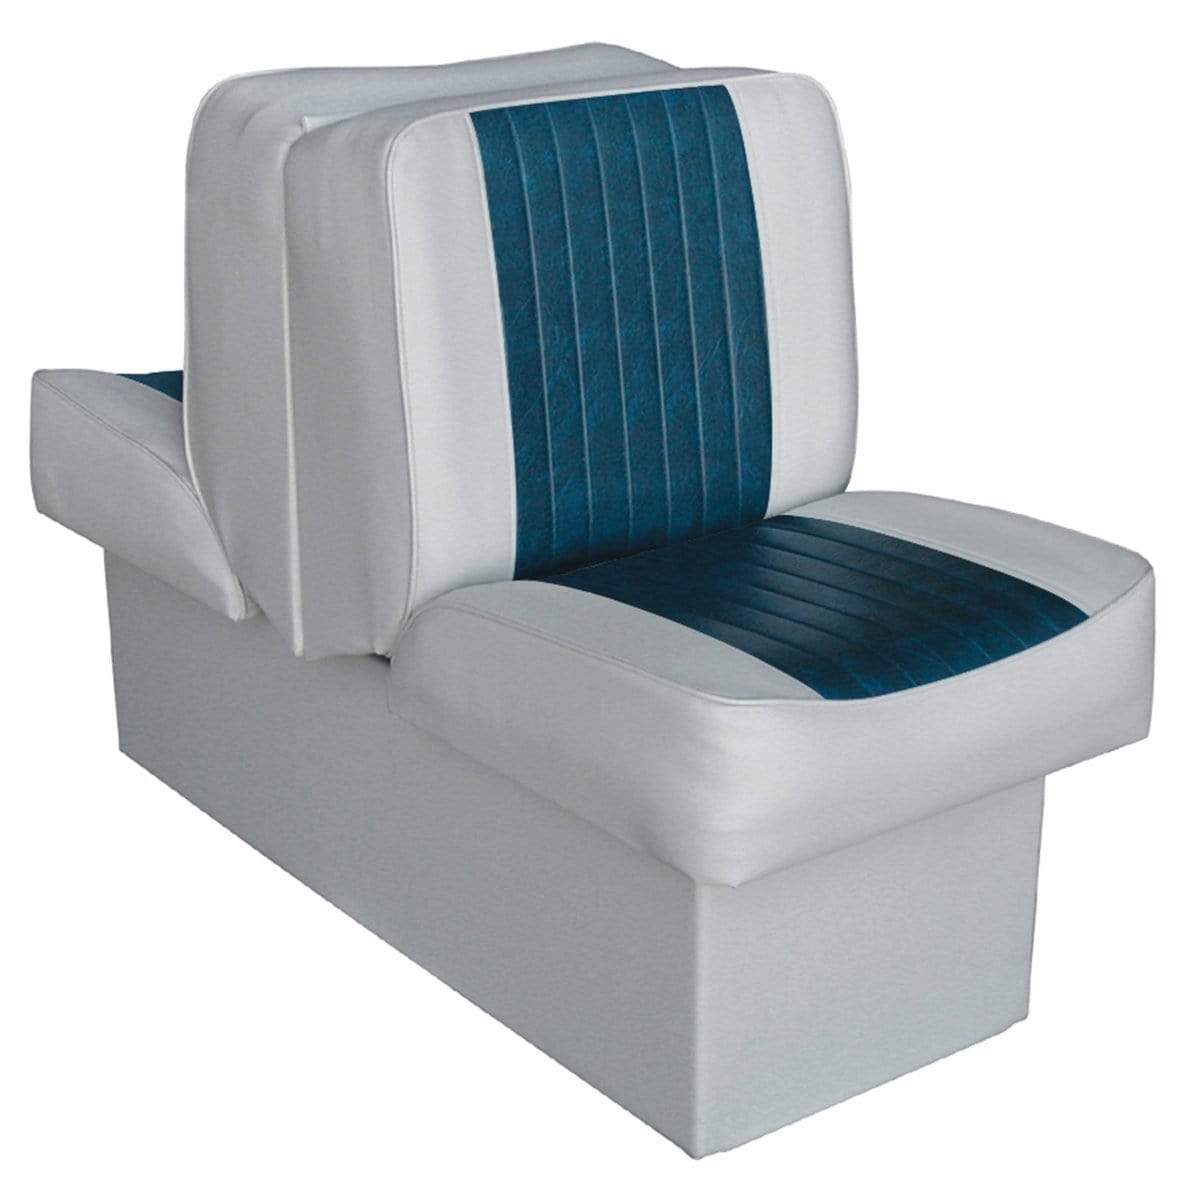 Wise Not Qualified for Free Shipping Wise Lounge Seat Deluxe Runner Gray-Navy #8WD707P-1-660